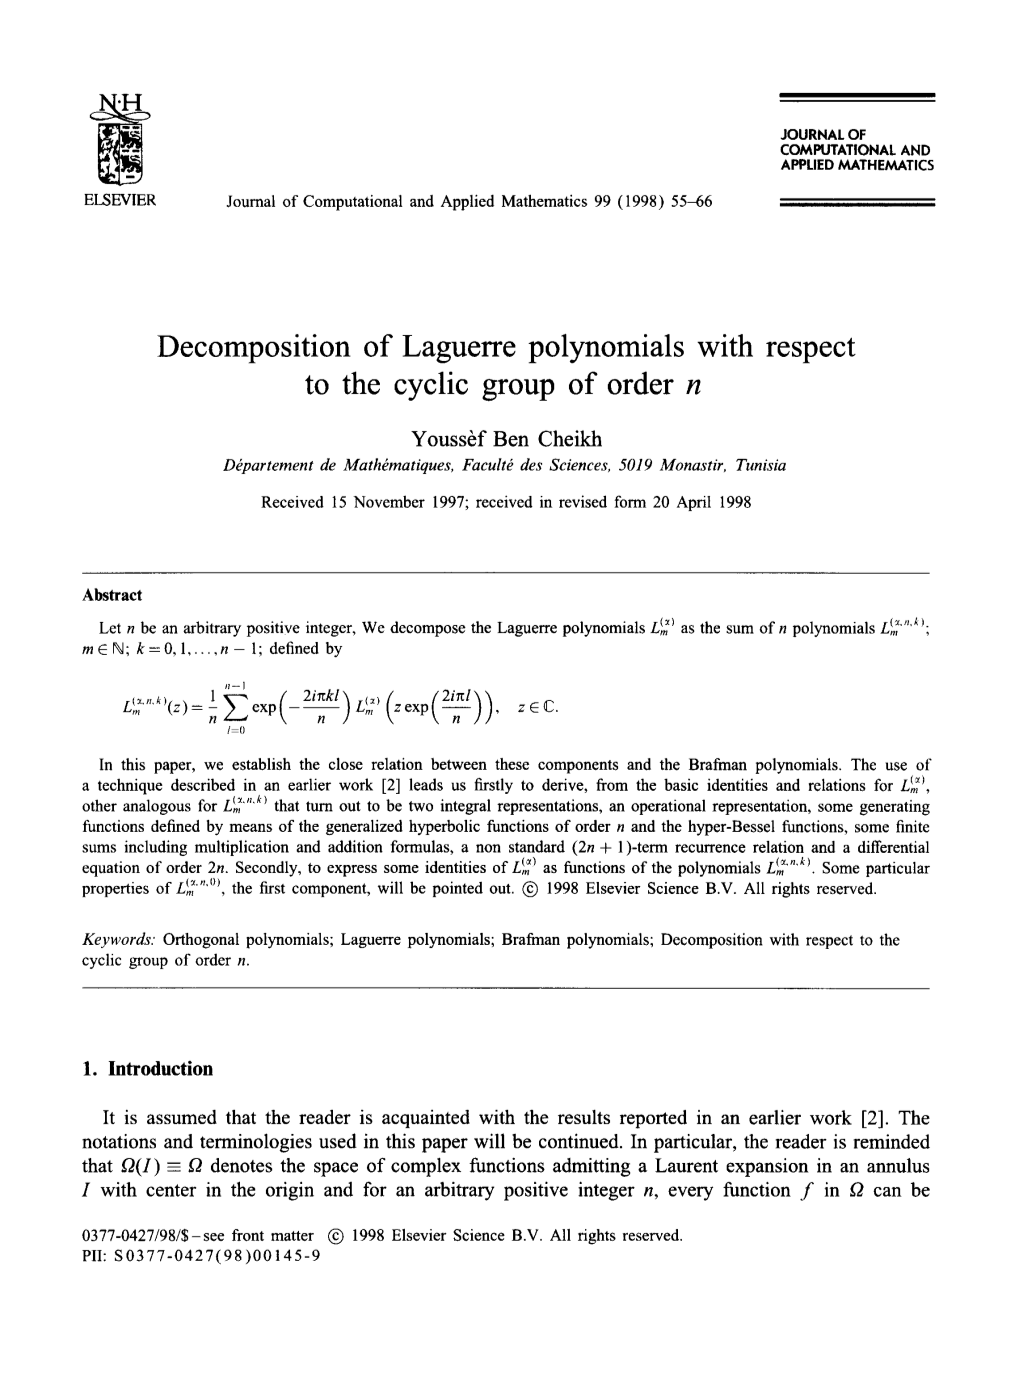 Decomposition of Laguerre Polynomials with Respect to the Cyclic Group of Order N